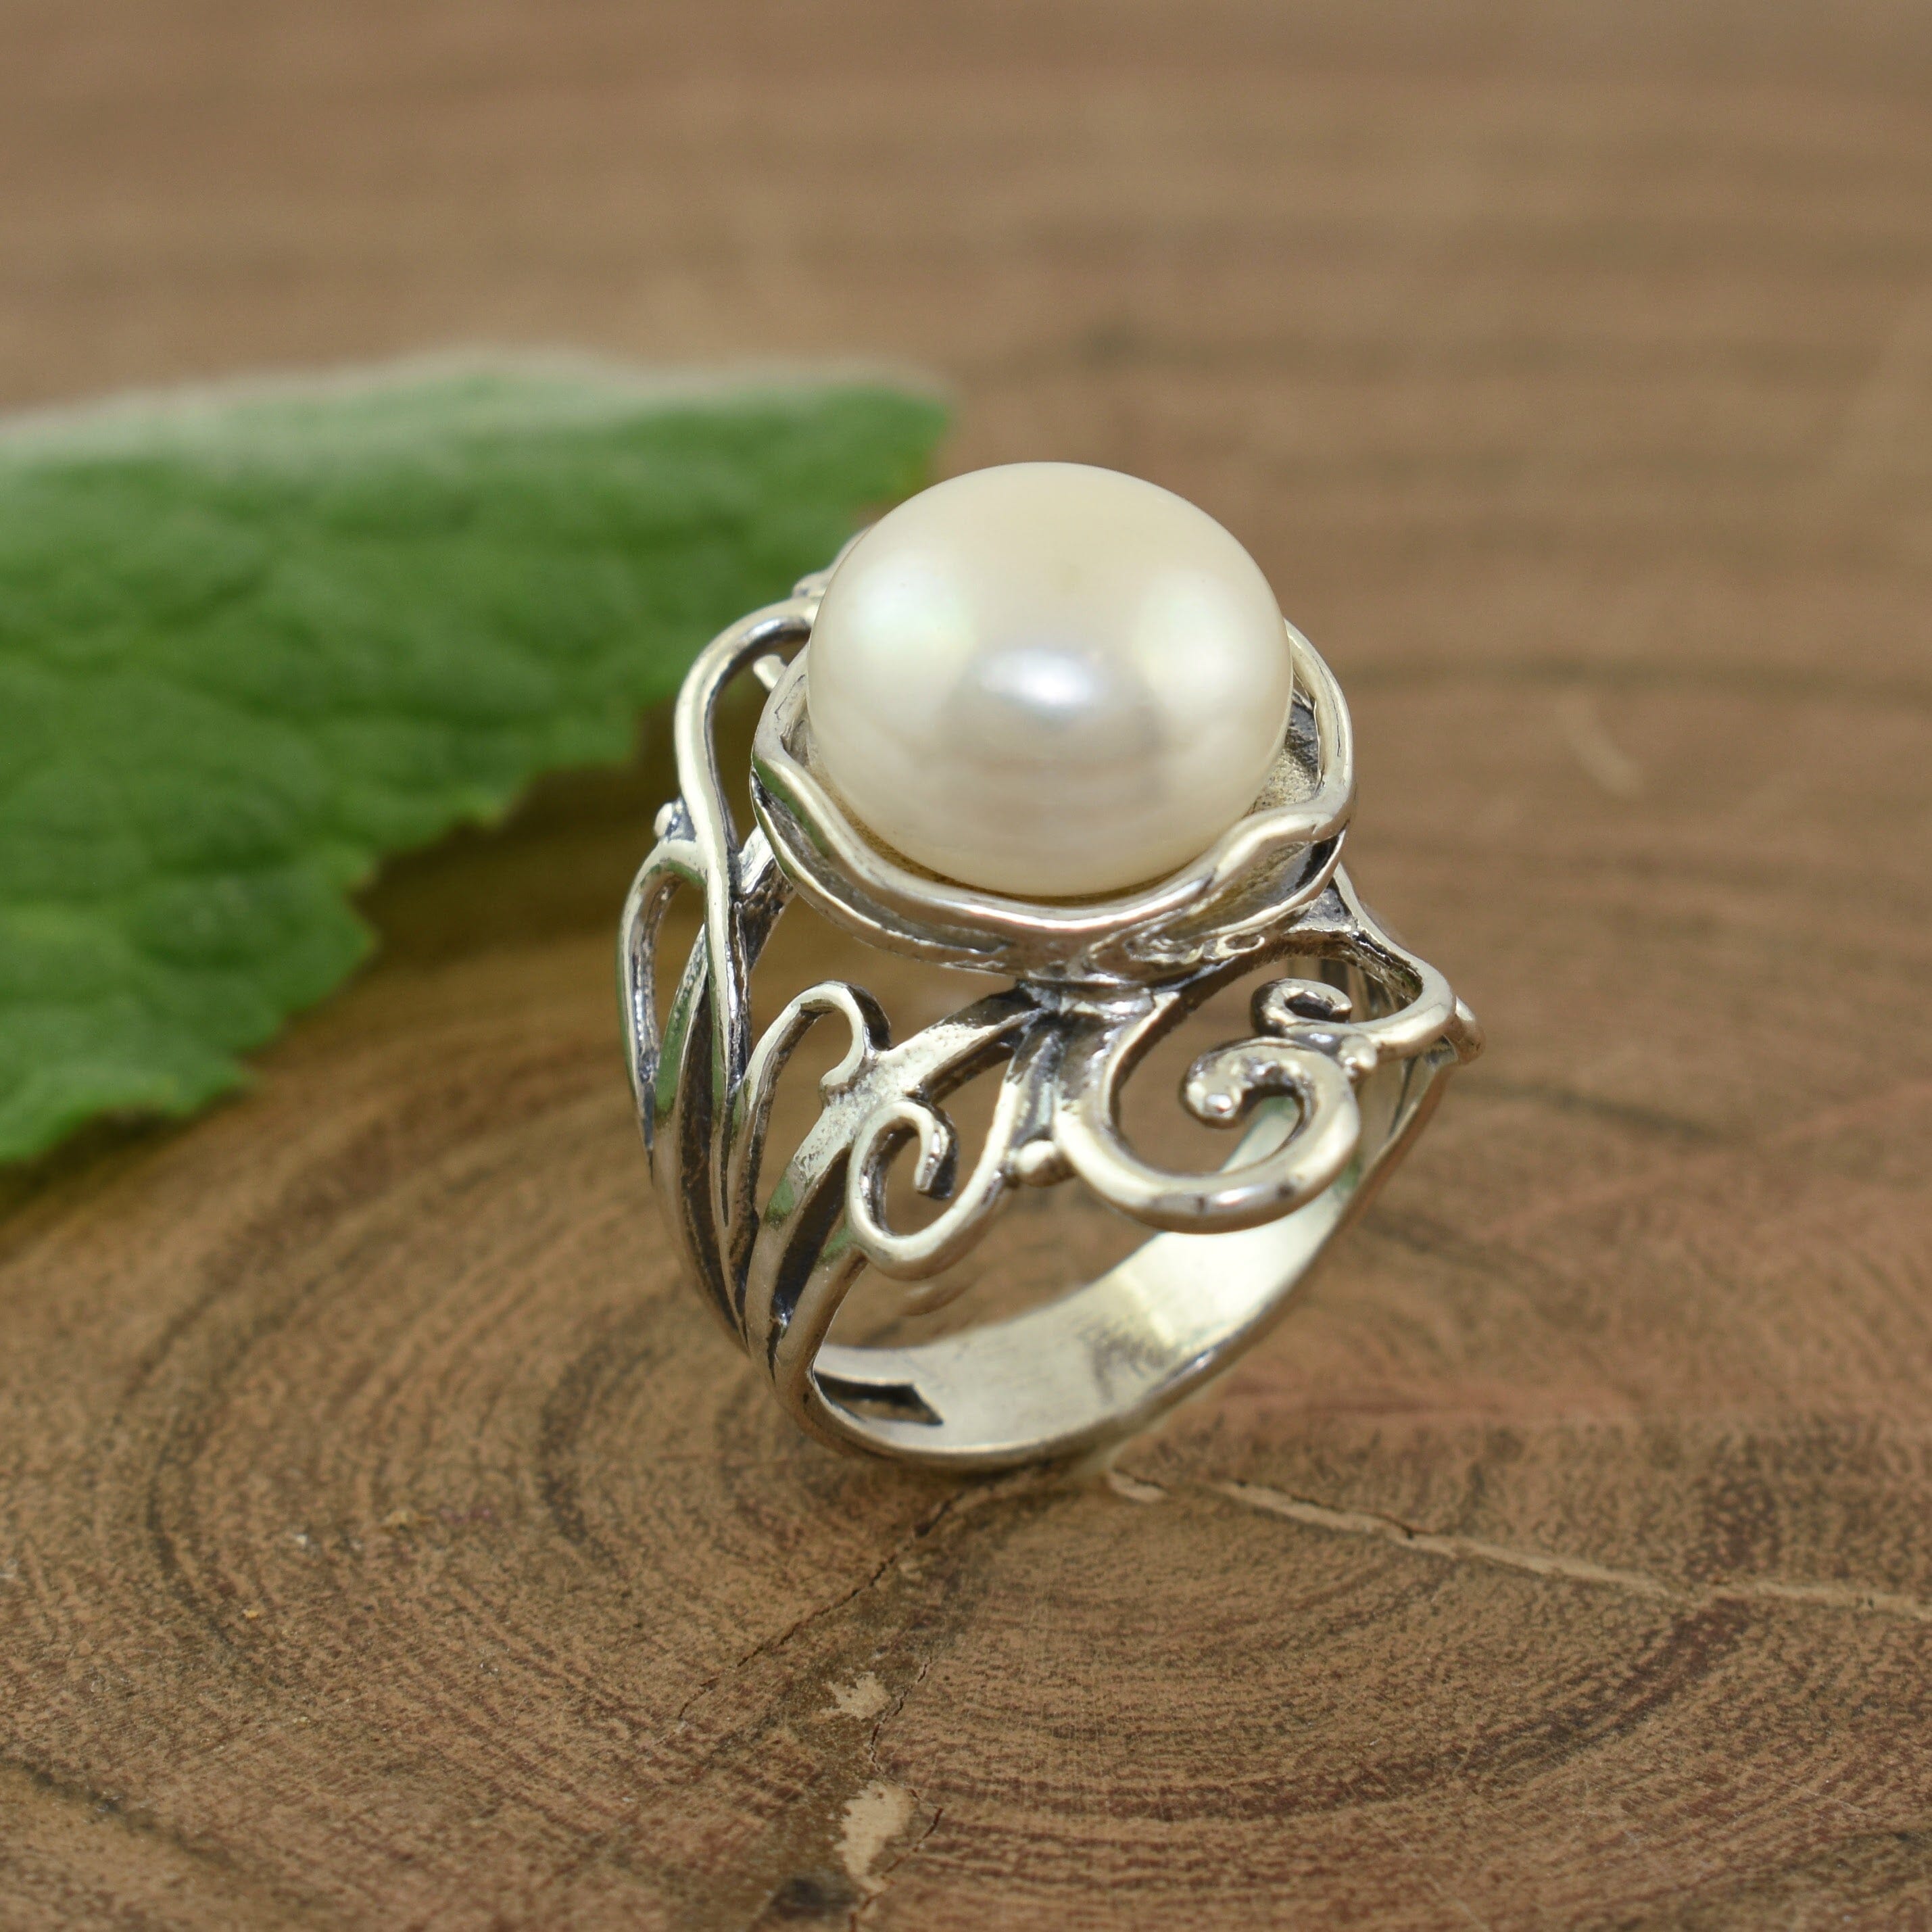 Designer sterling silver ring with freshwater pearl